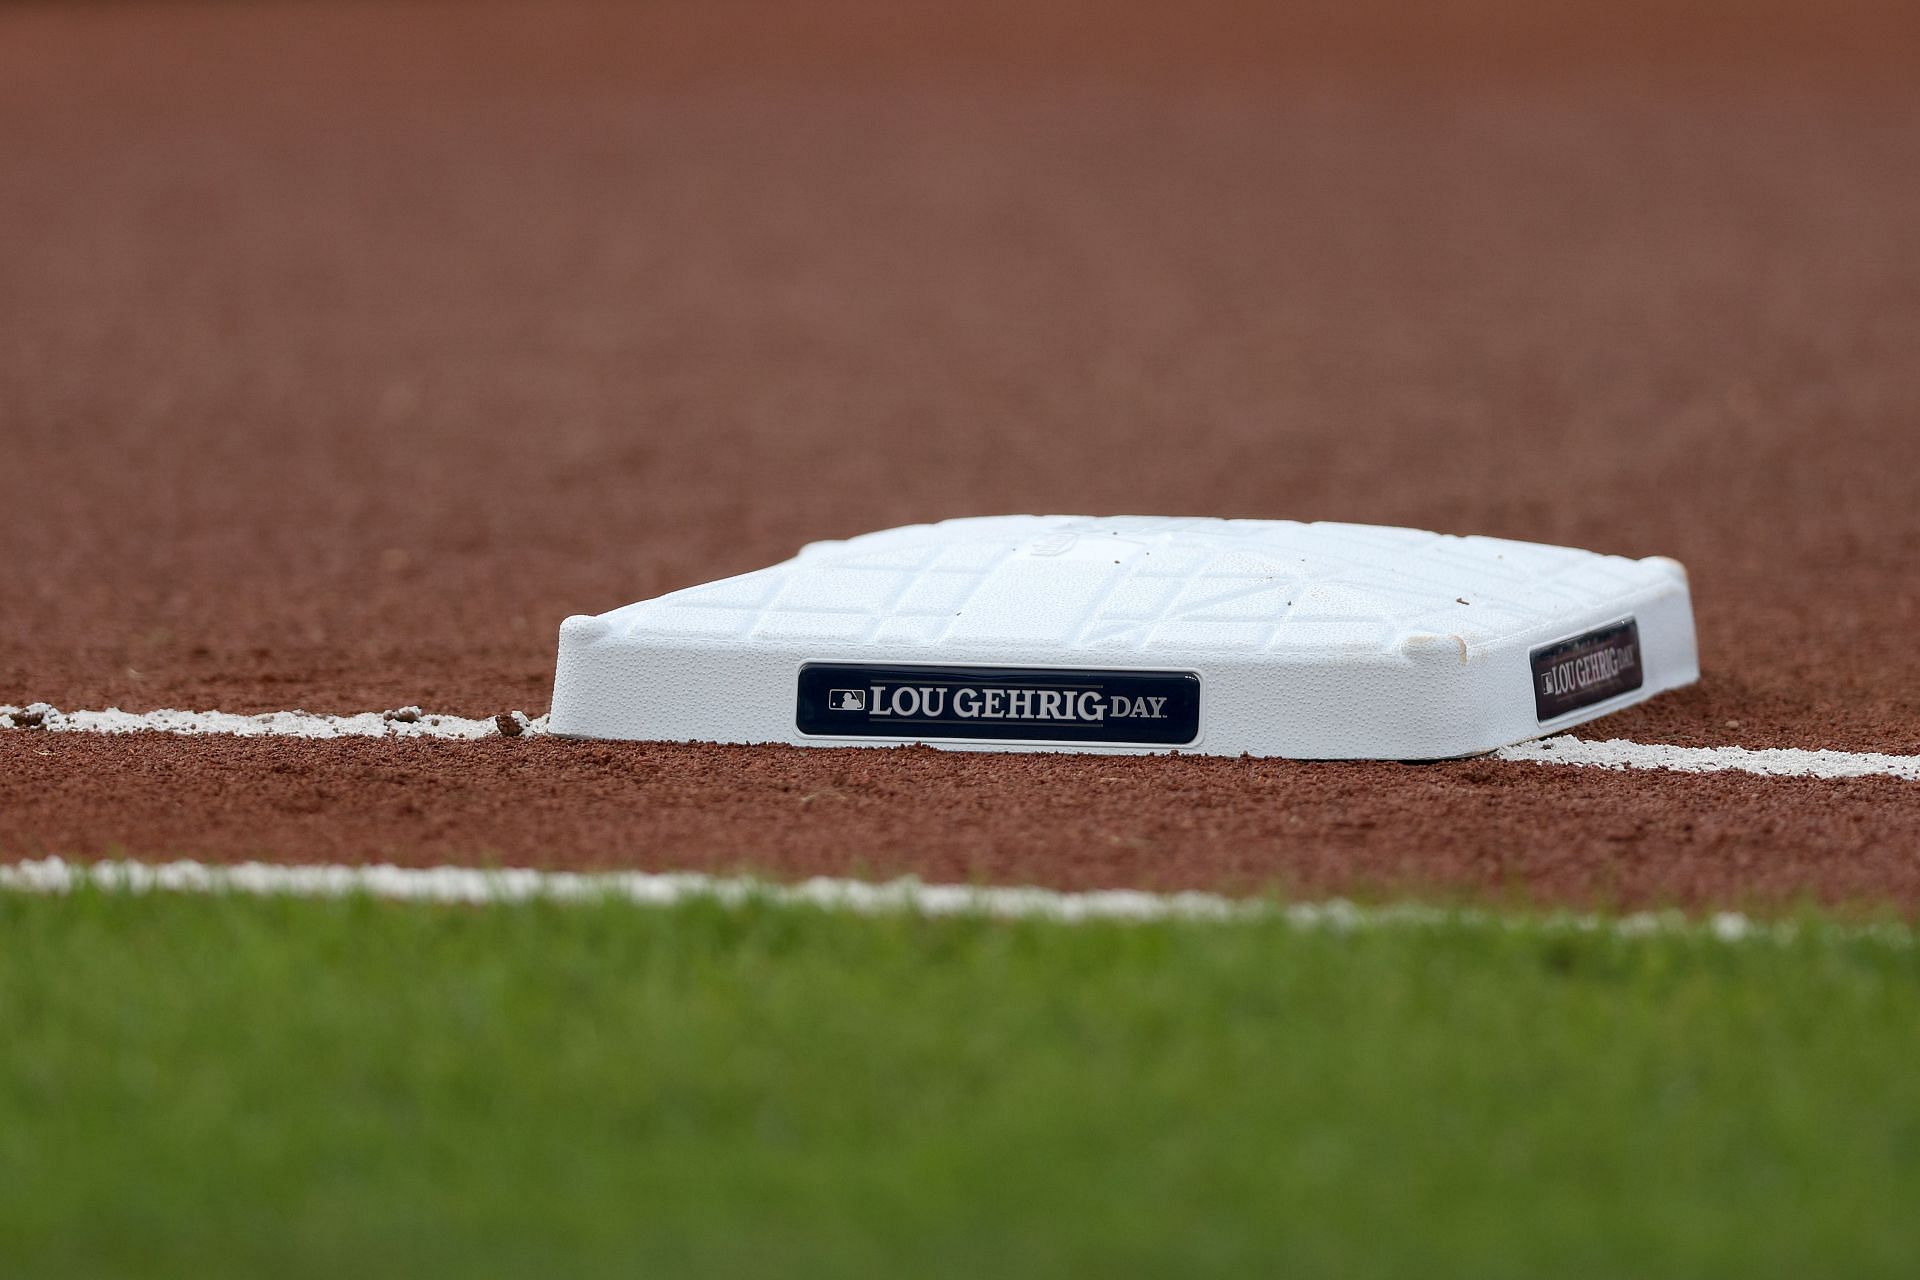 The MLB commemorates Lou Gehrig every year on June 2